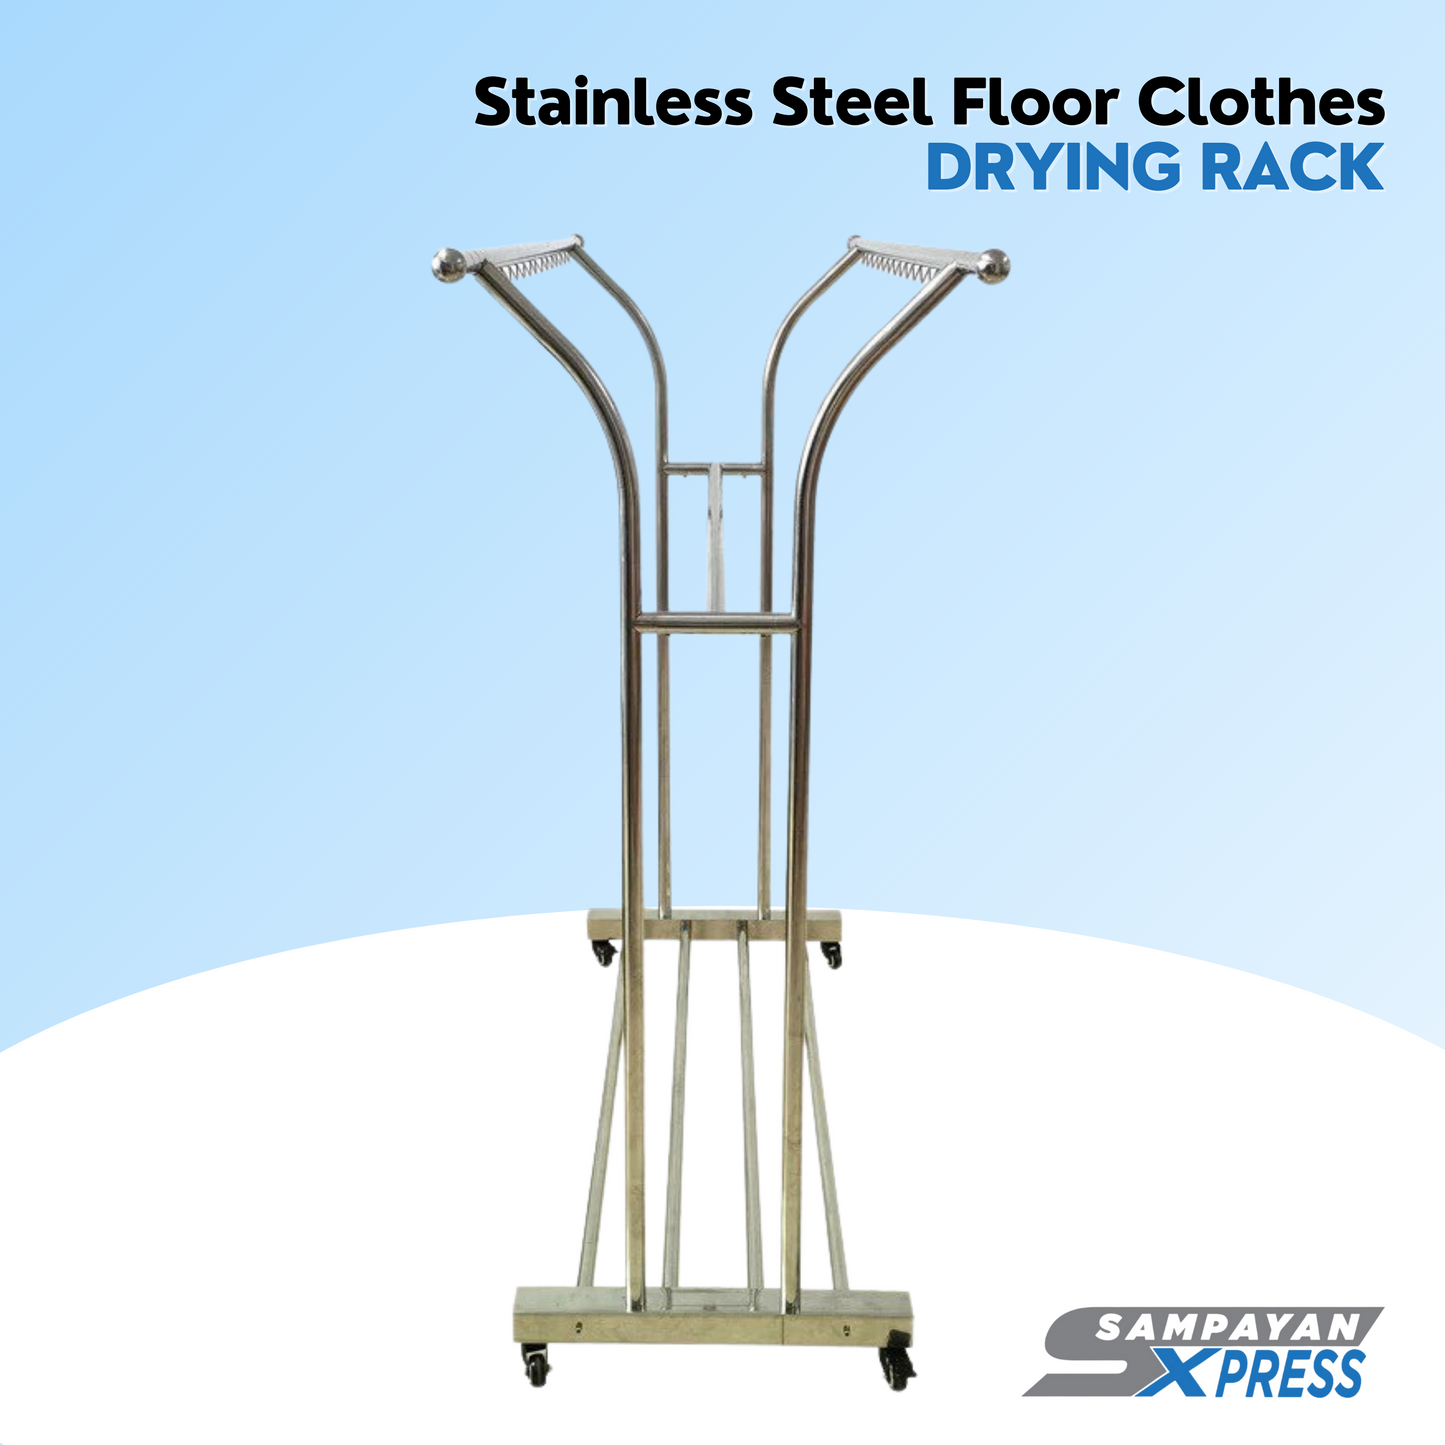 FlexiDry™ Y-Type Stainless Steel Movable Drying Rack with Wheels